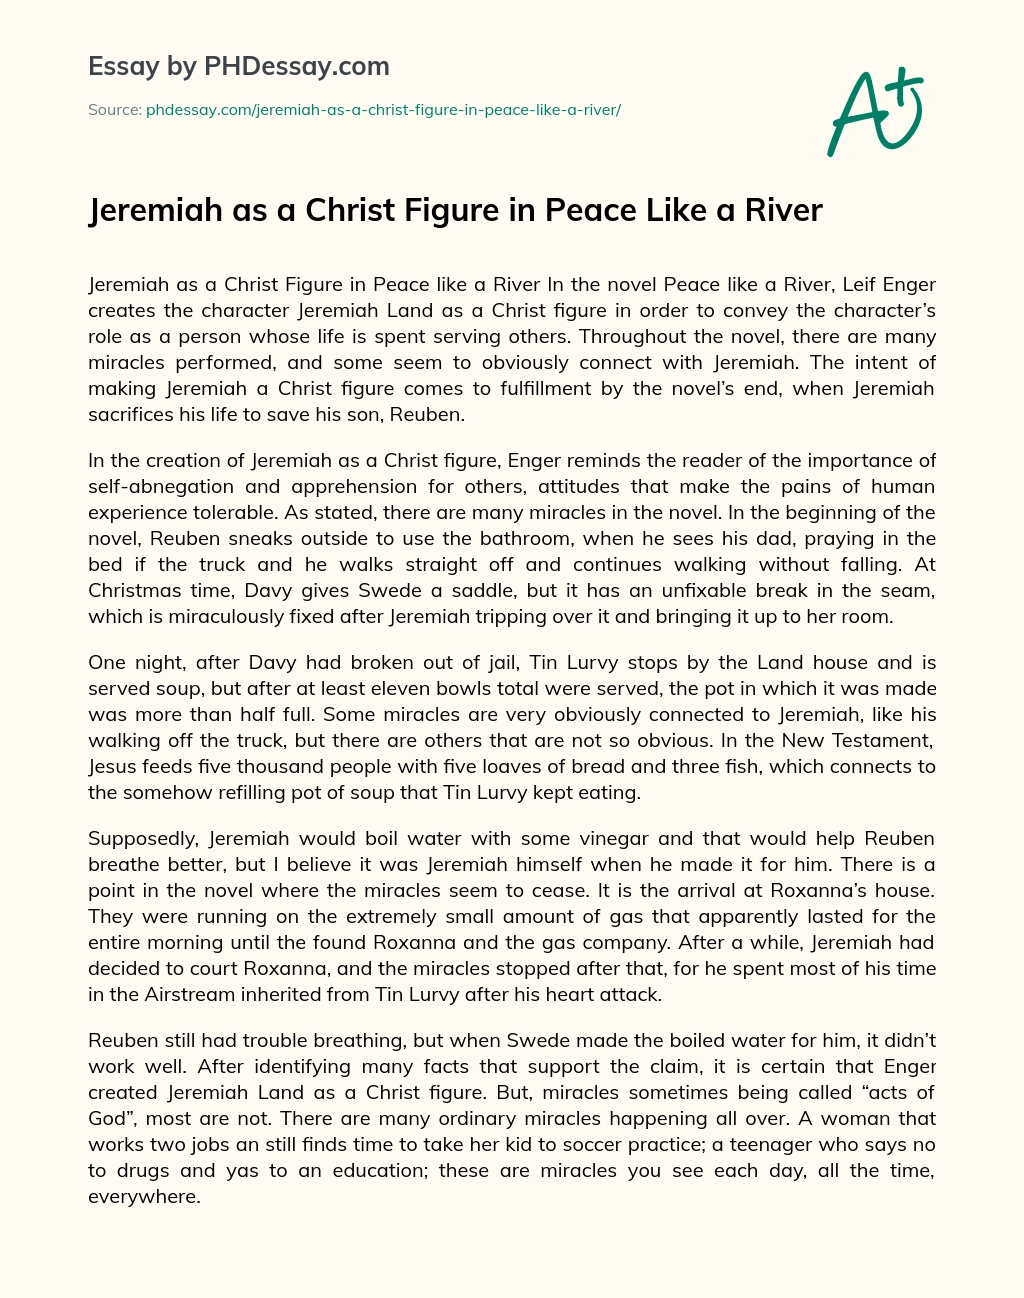 Jeremiah as a Christ Figure in Peace Like a River essay